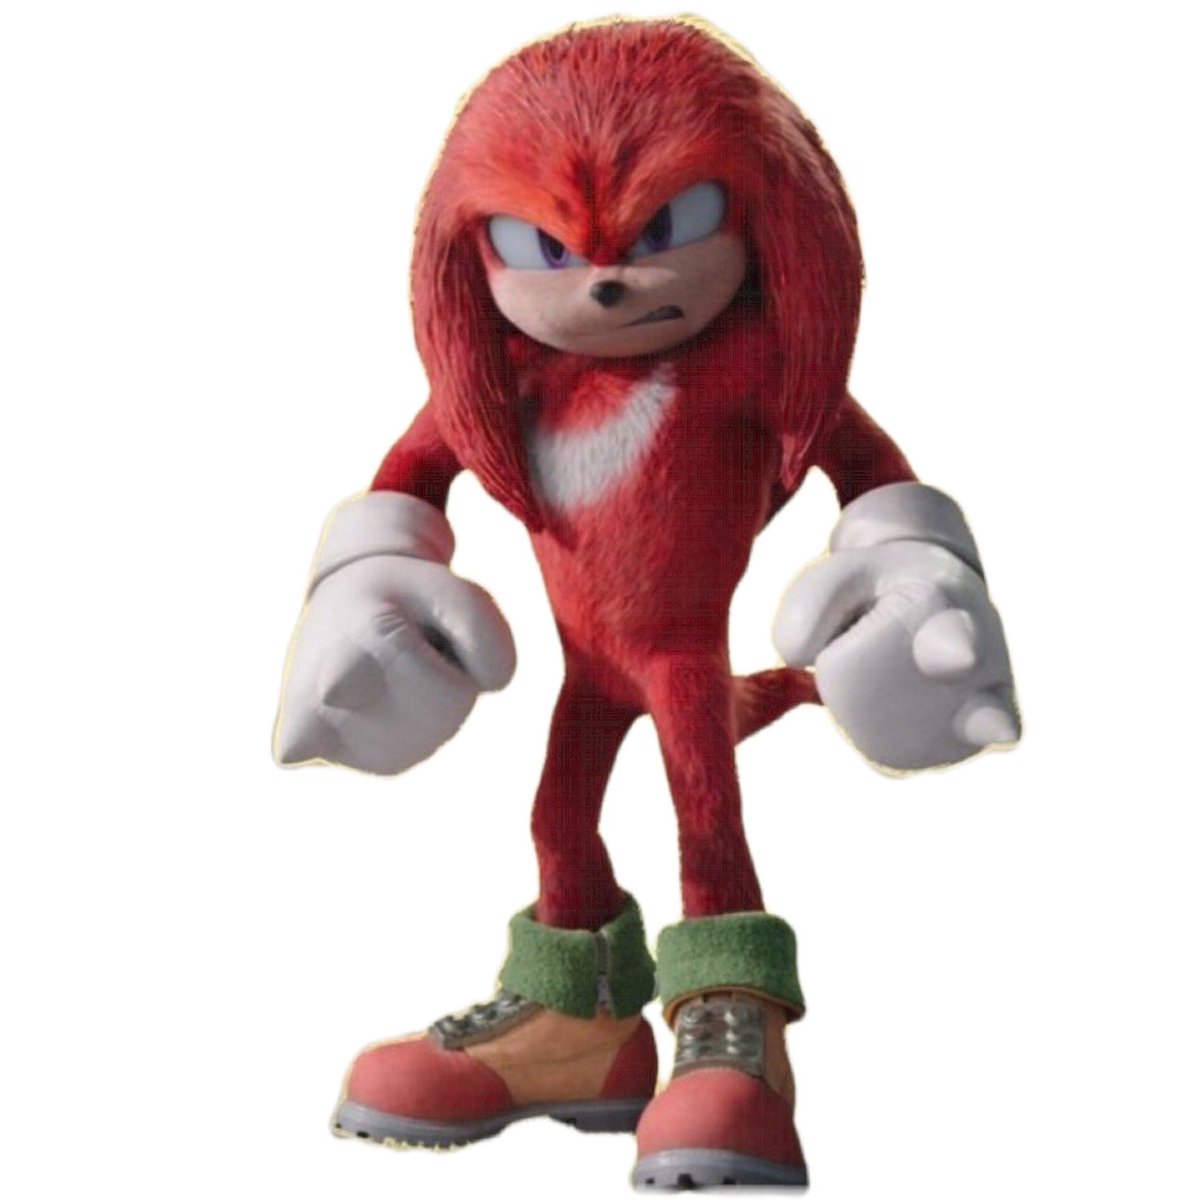 RT @TheAnything_Bot: I feel like Movie Knuckles should be friends with Gordon Ramsay! https://t.co/e8b9IvT4Ty